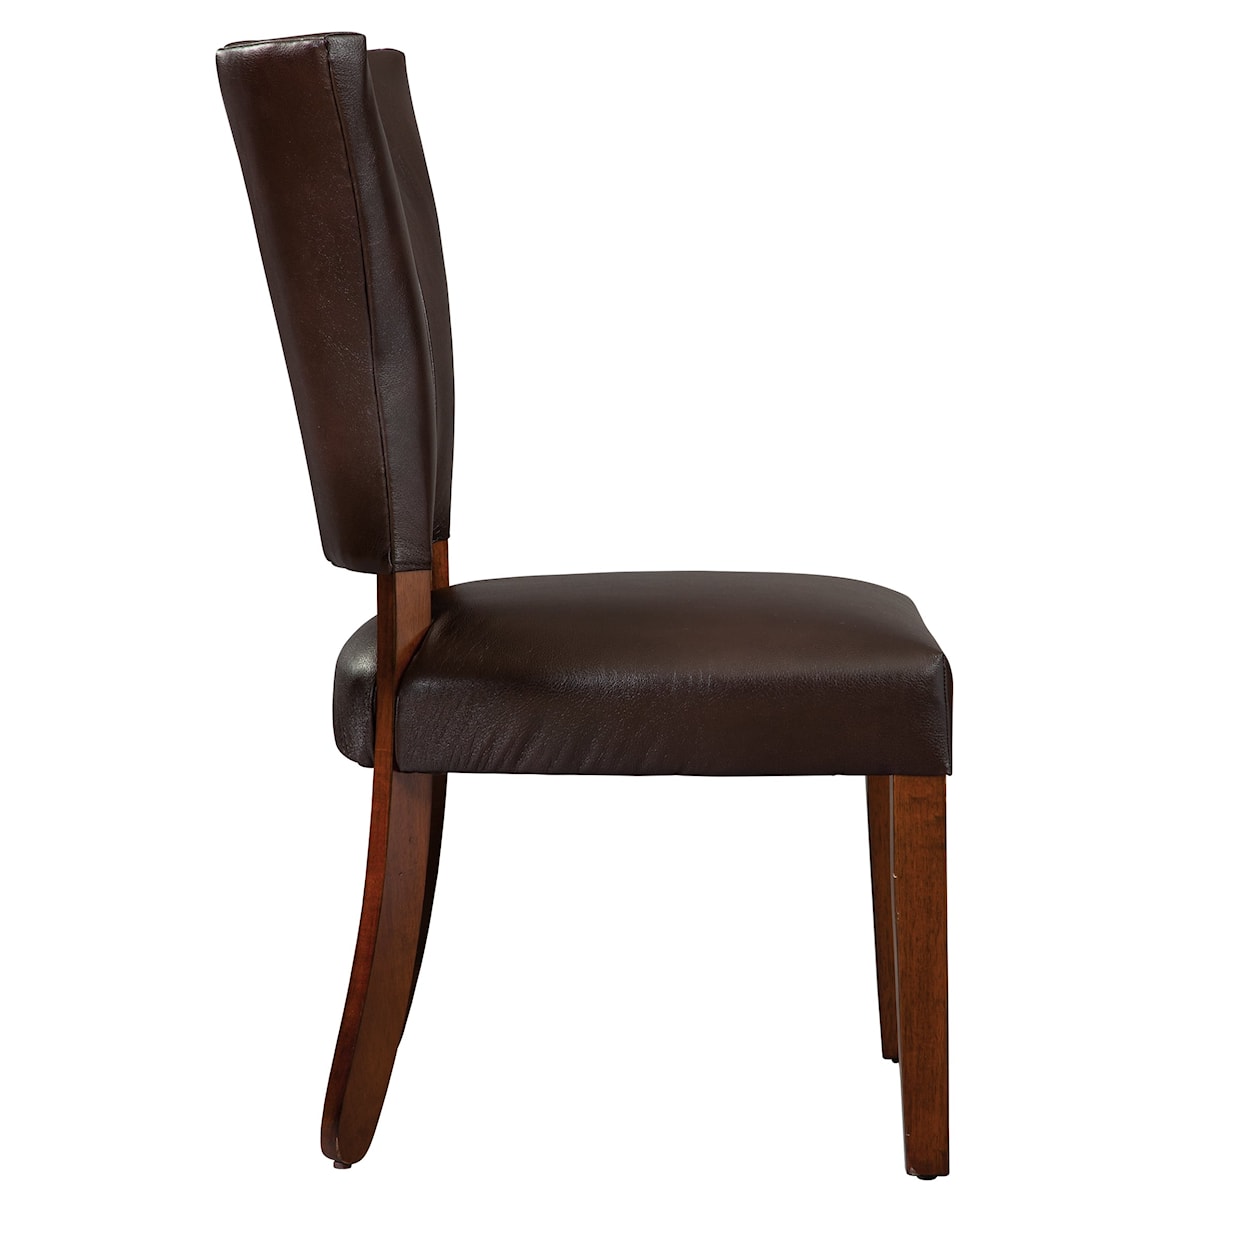 Hekman Upholstery Willis Dining Chair